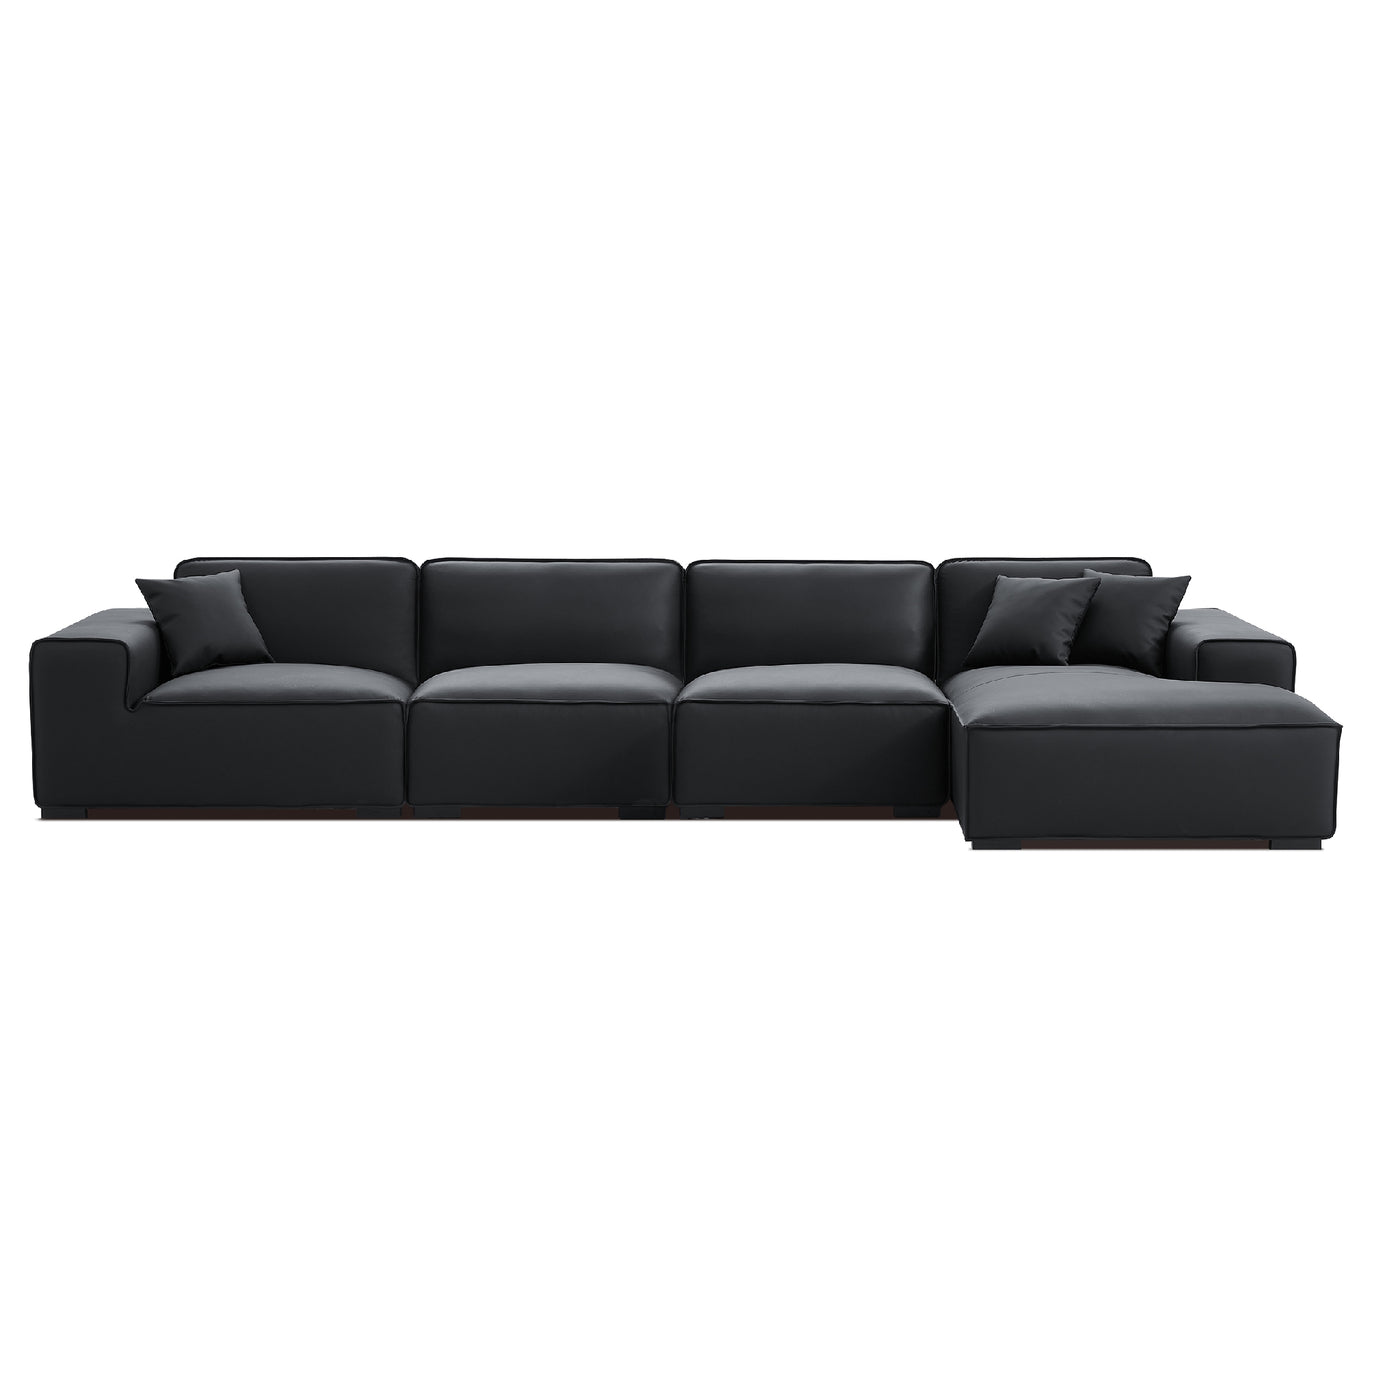 Domus Modular Beige Leather Sectional Sofa-Black-161.4"-Facing Right